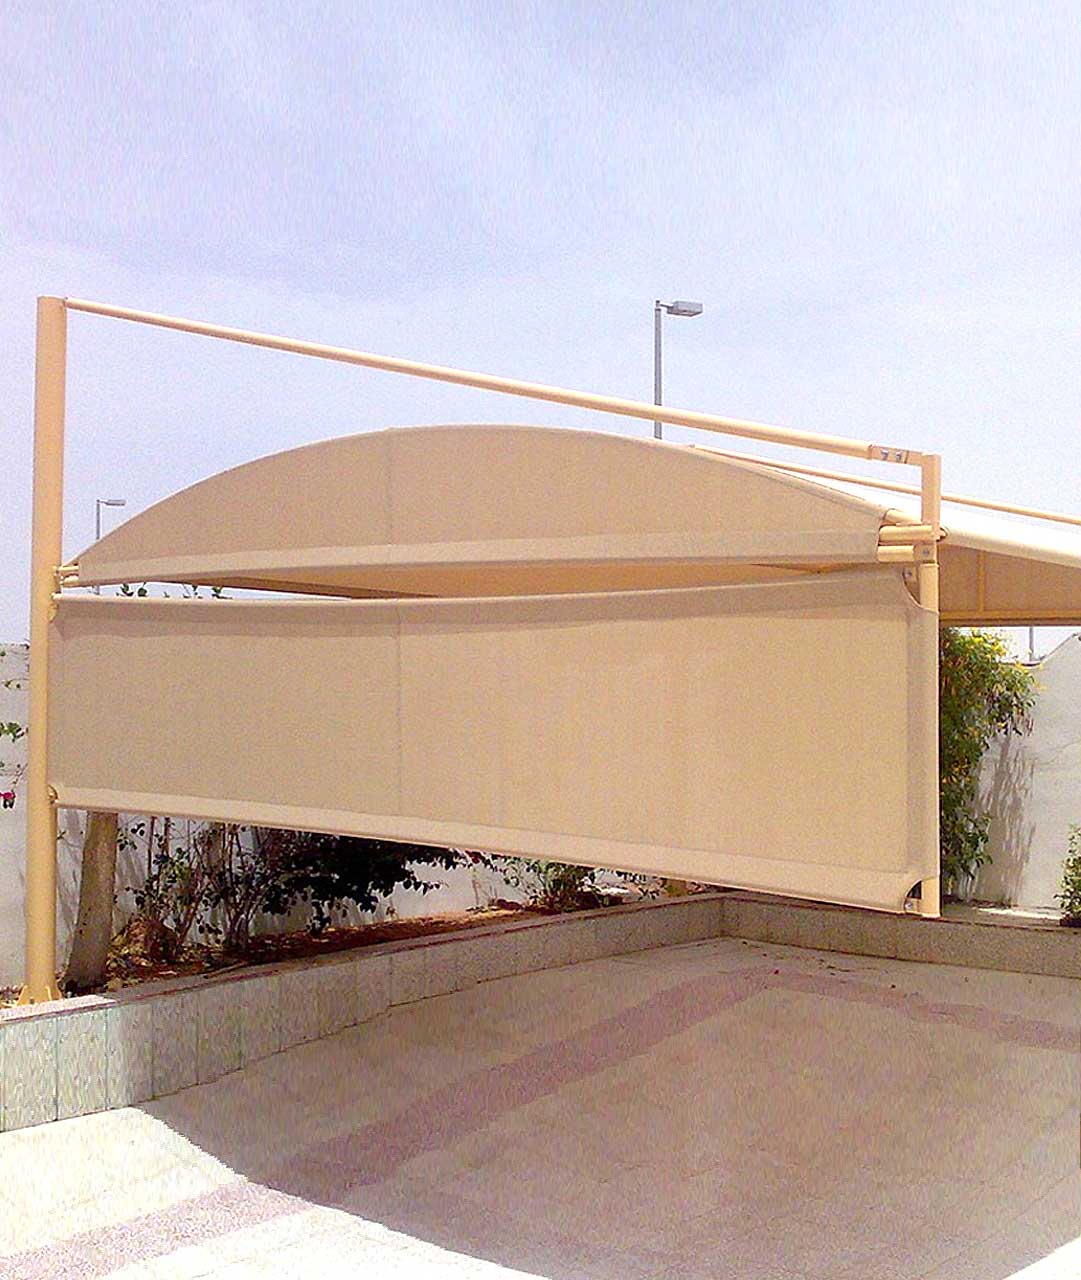 CAR SHADE-WATERPROOF PARKING SHADE-PARKING SHADE CANOPY-CARPORT-SHADE SYSTEMS-SHADE SOLUTIONS-OUTDOOR SHADES-CAR SHADE-CAR WASH SHADE-CAR PARK SHADE-SHADE NETTING SHADE-PARKING SUN SHADE-CAR COVER-COMMERCIAL CAR SHADES-RESIDENTIAL CAR SHADES-CAR SHADES FOR OFFICES-CAR SHADES FOR A FACTORY-PARKING SHADES FOR HOMES VILLAS TOWN HOUSES-PARKING SHADES FOR A COMPANY-CURVED CAR SHADE-CANTILEVER CAR SHADE SUPPLIER AND MANUFACTURING COMPANY 